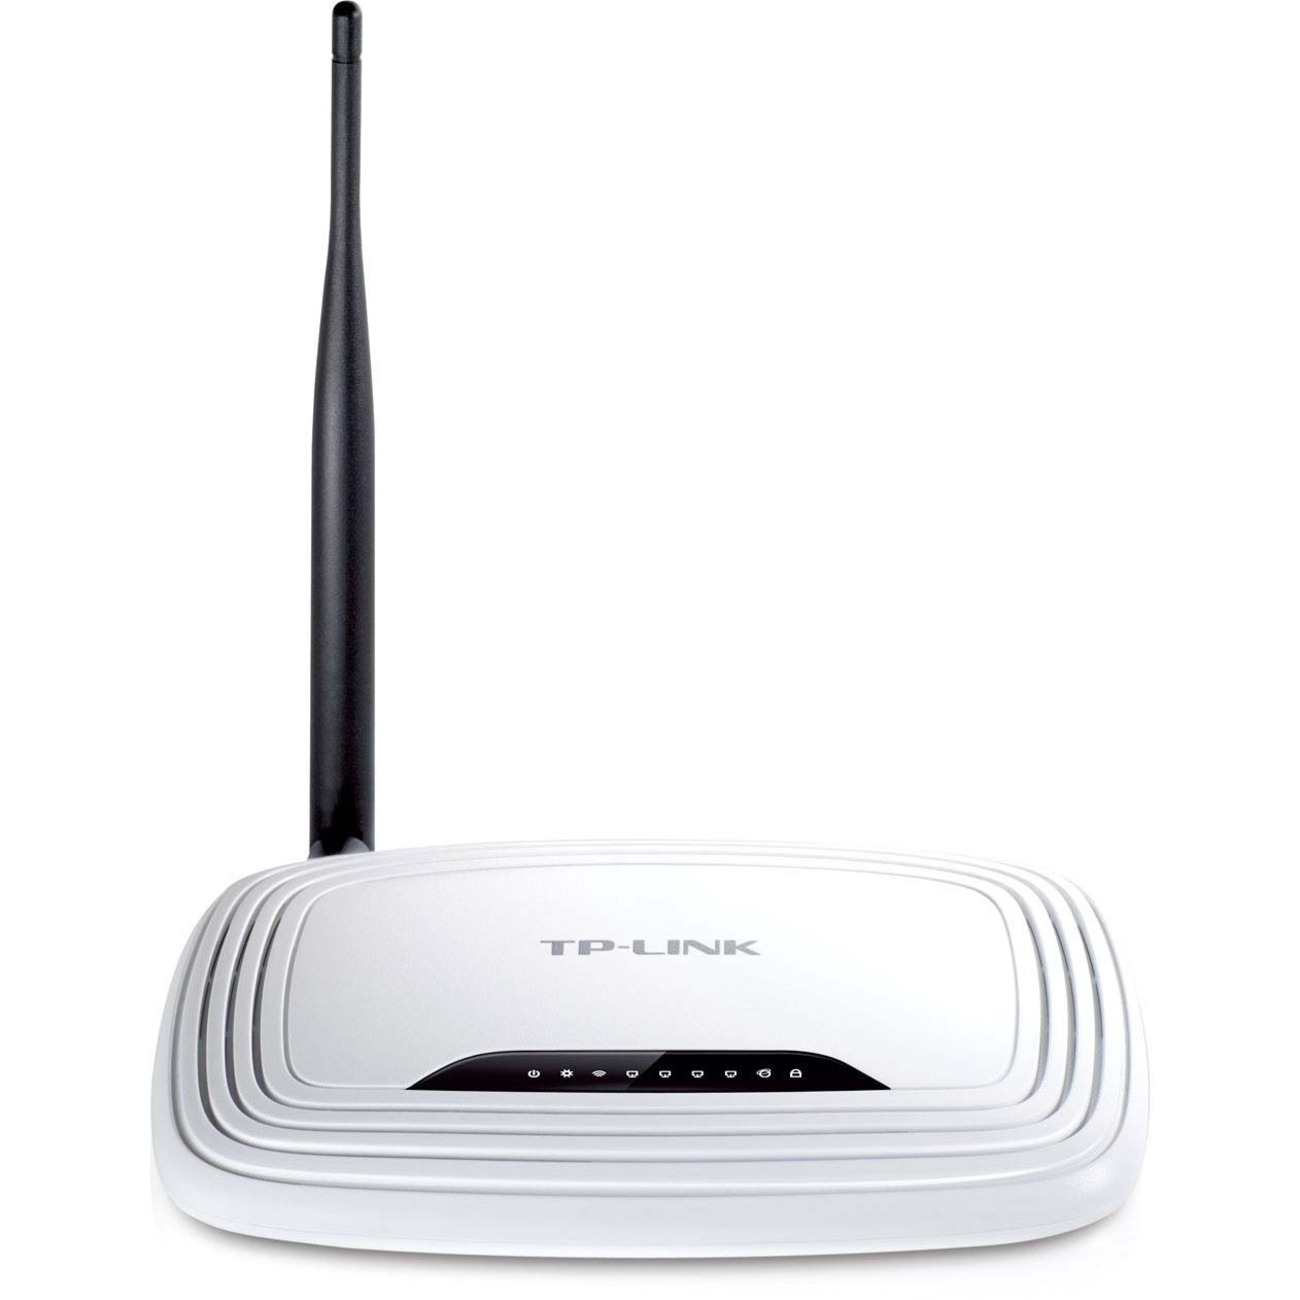 TP-LINK 150MBPS WIRELESS LITE N ROUTER